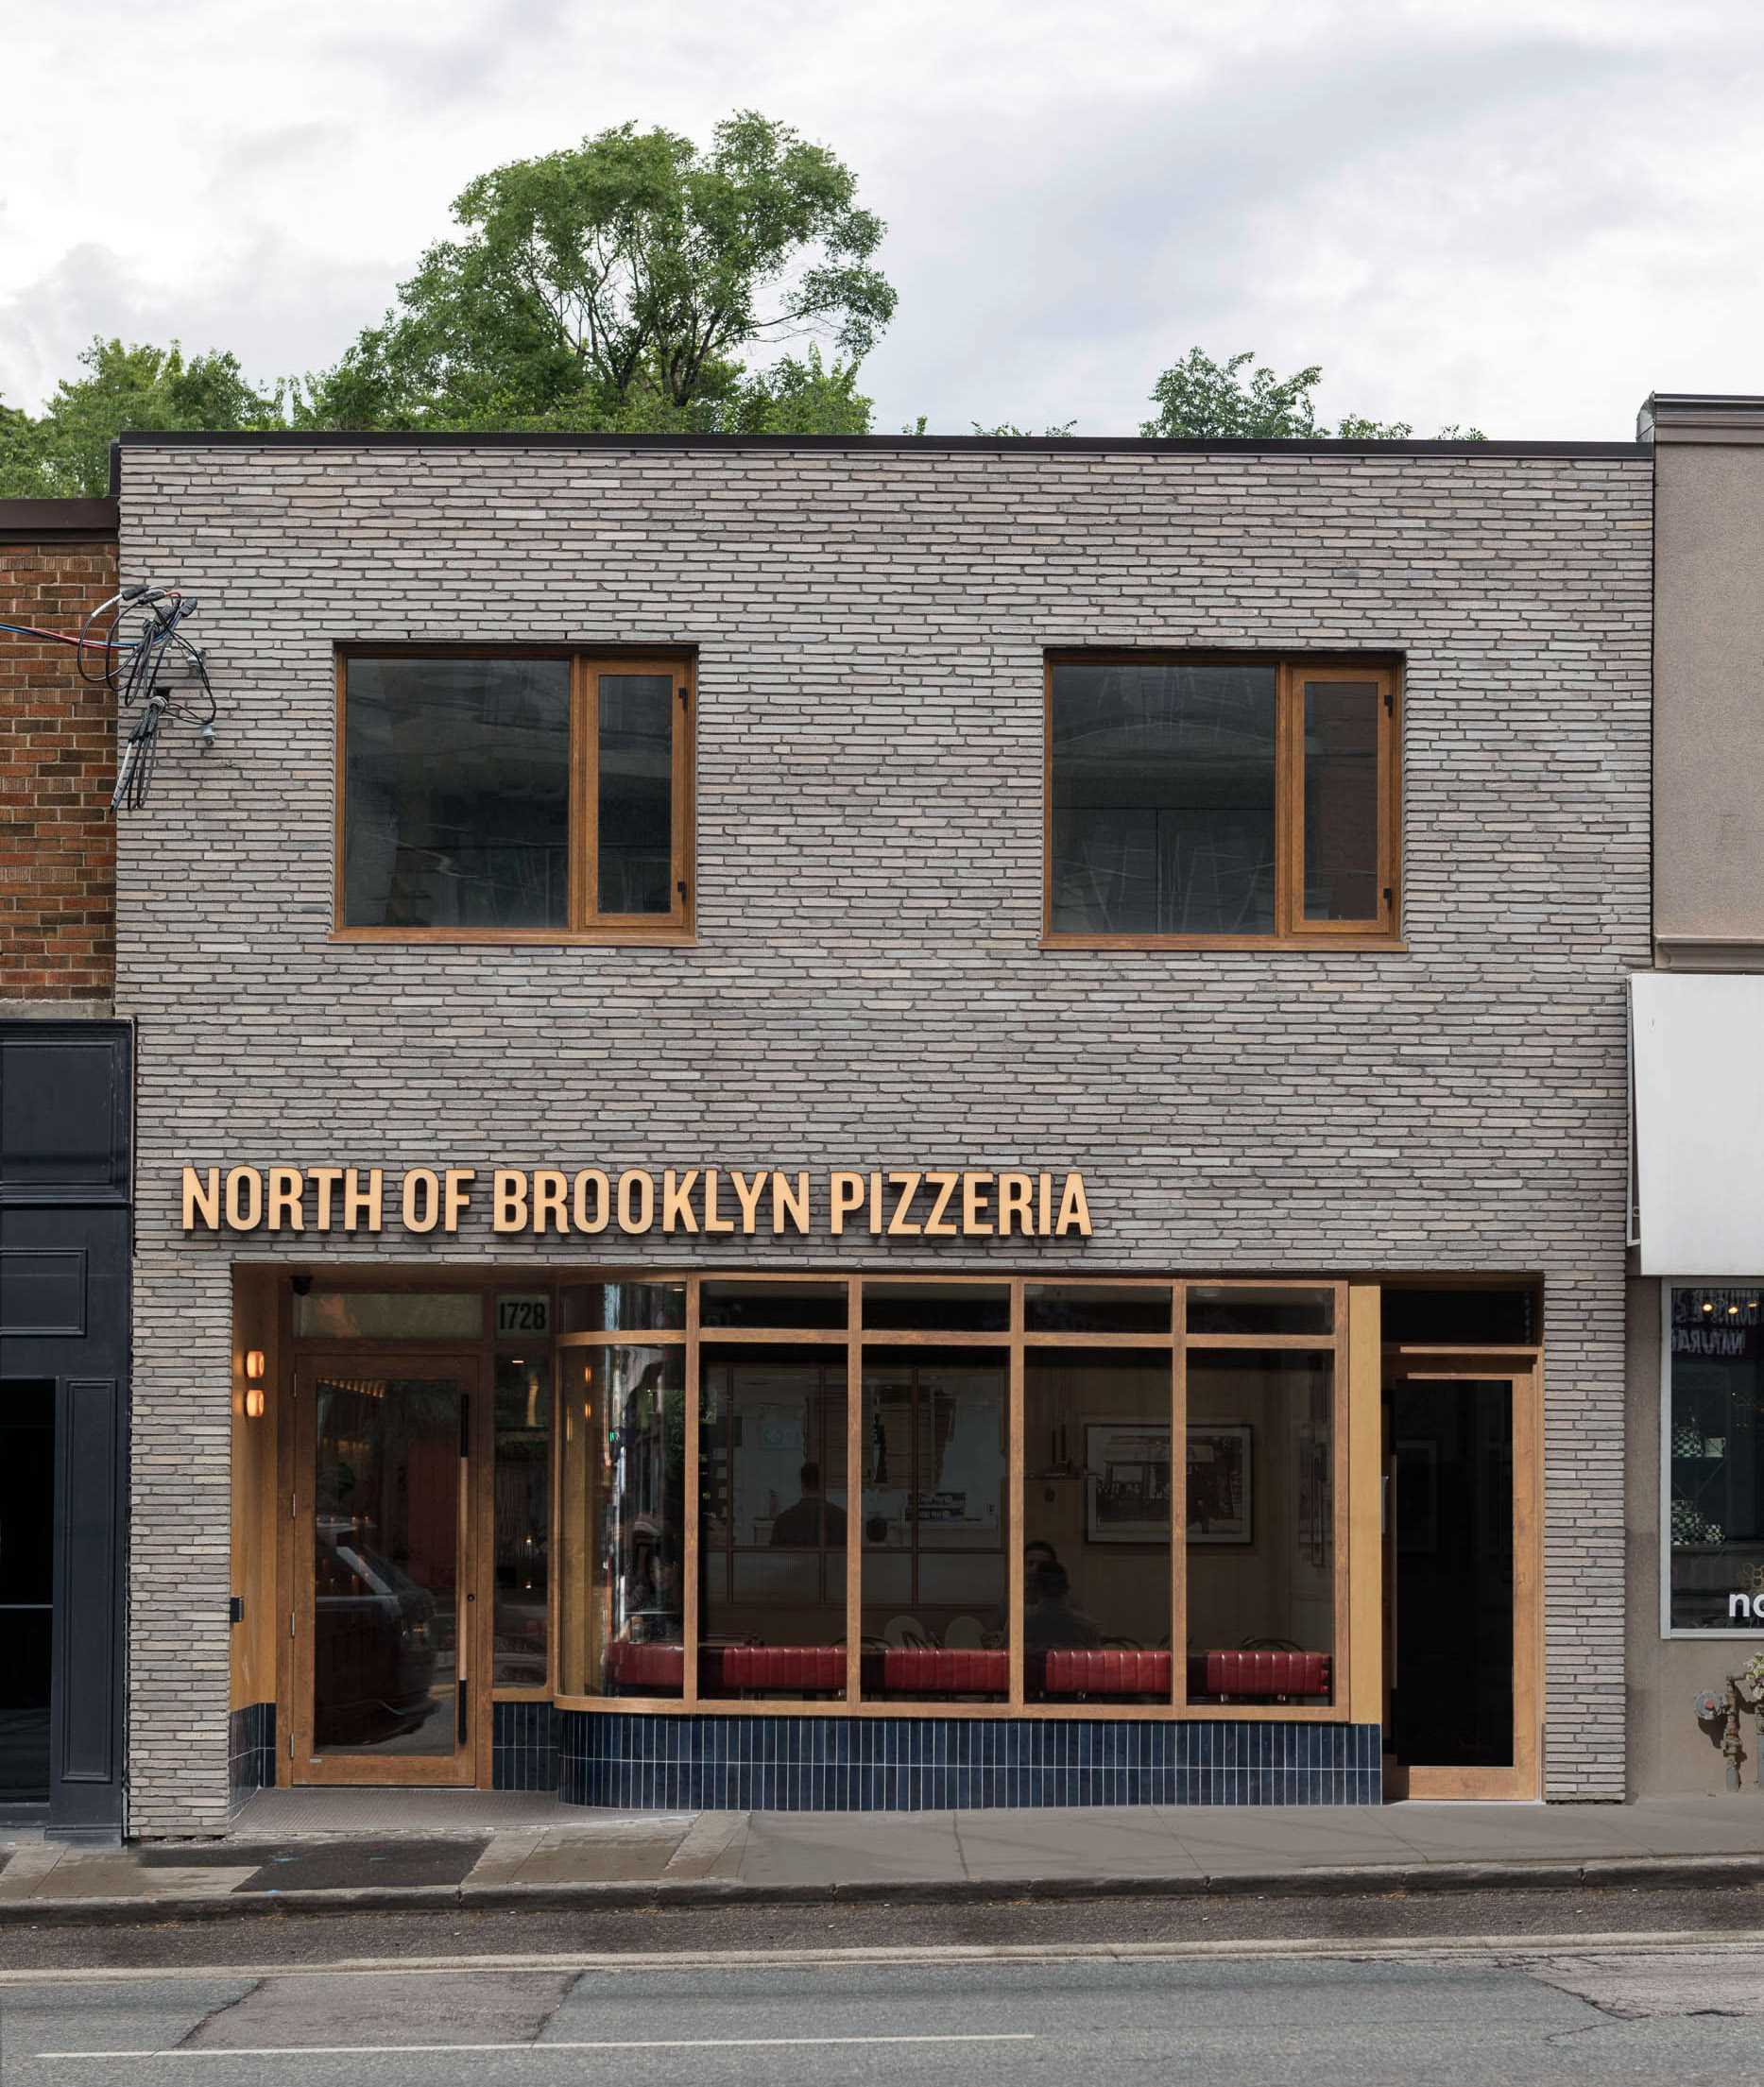 The facade of this pizzeria has been transformed and features light brick, wooden windows, and a curving blue ceramic tile.